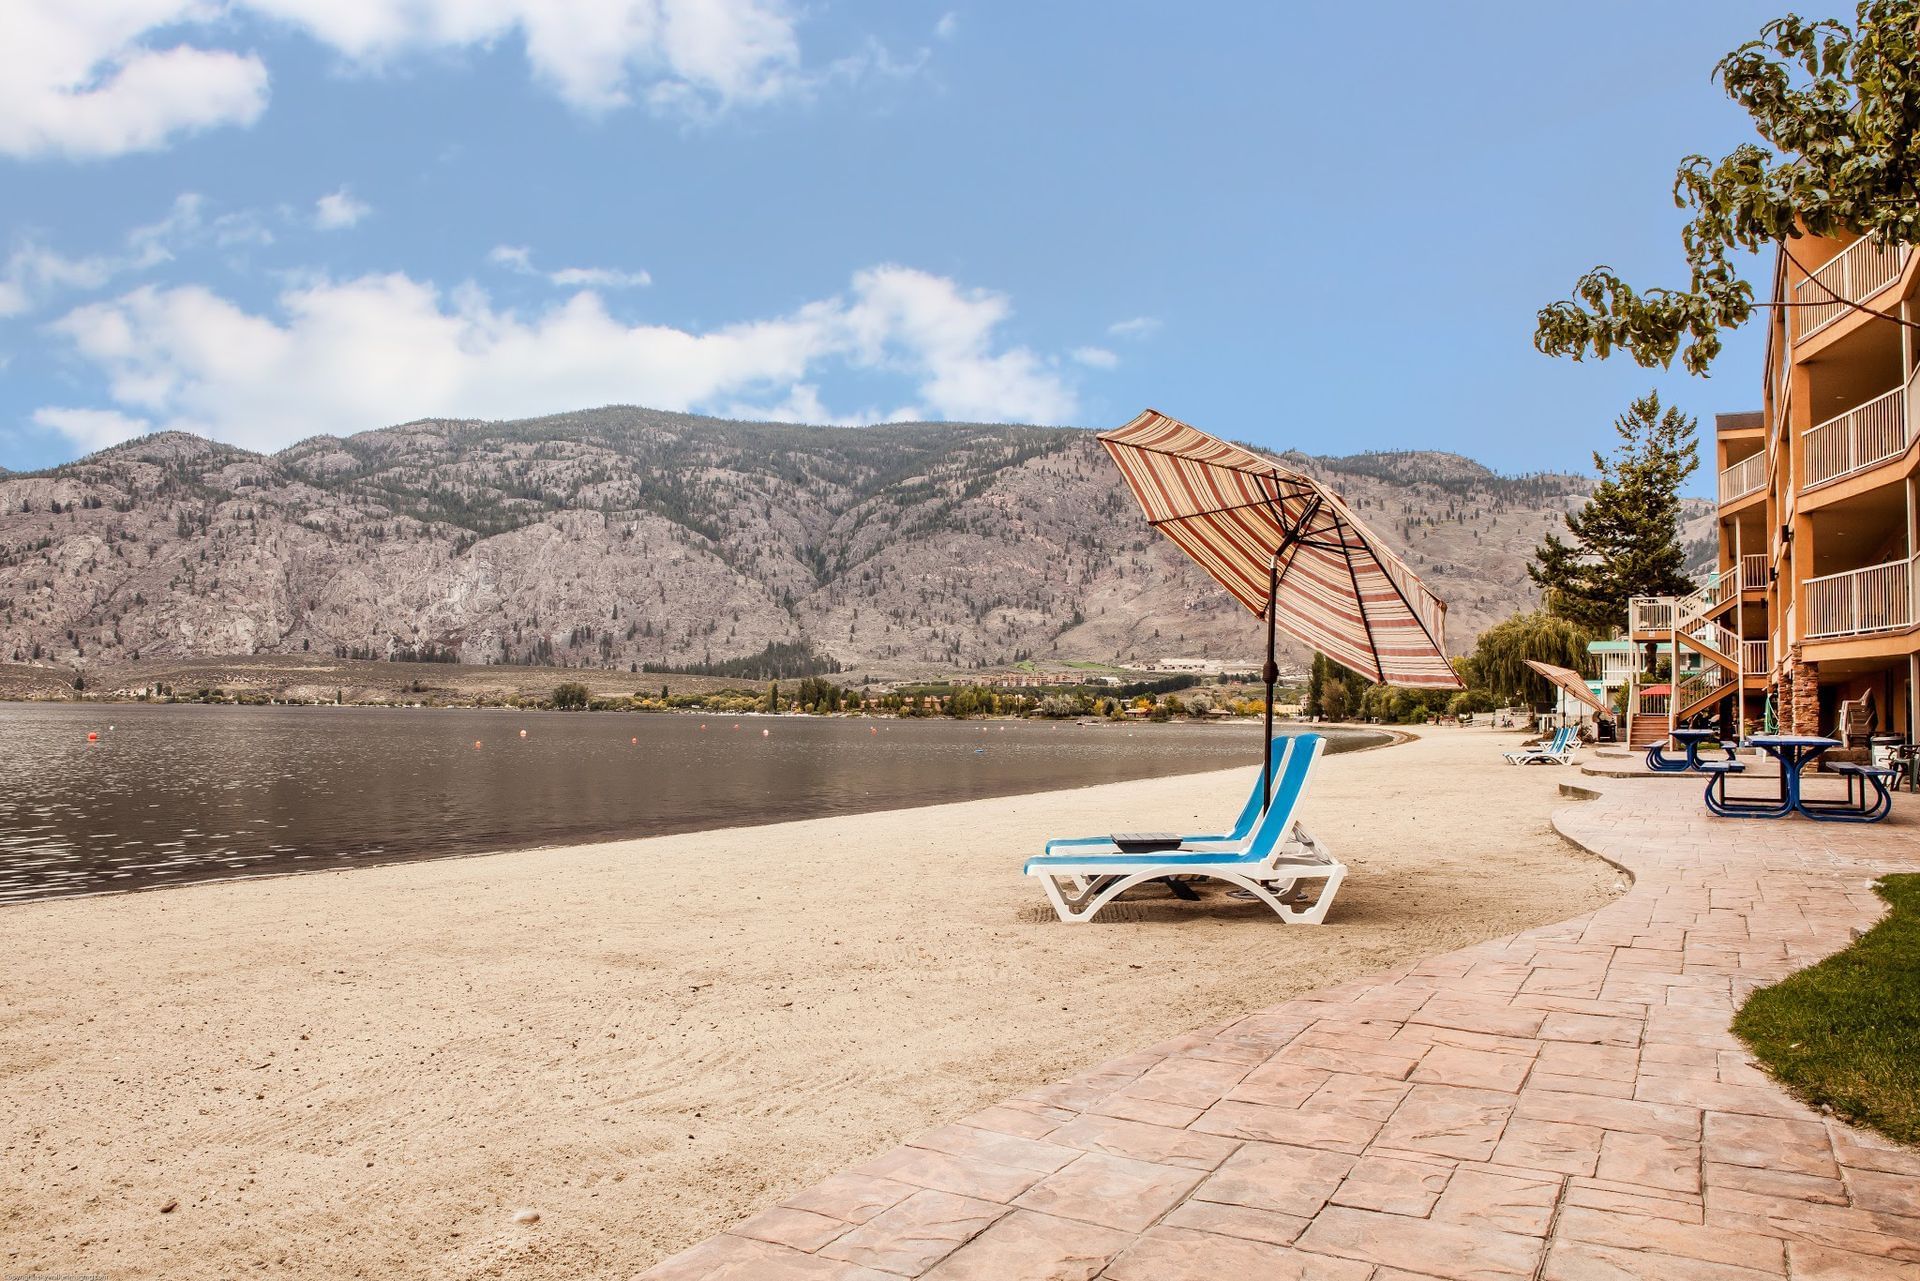 Chairs and umbrellas on beach overlooking lake and mountains